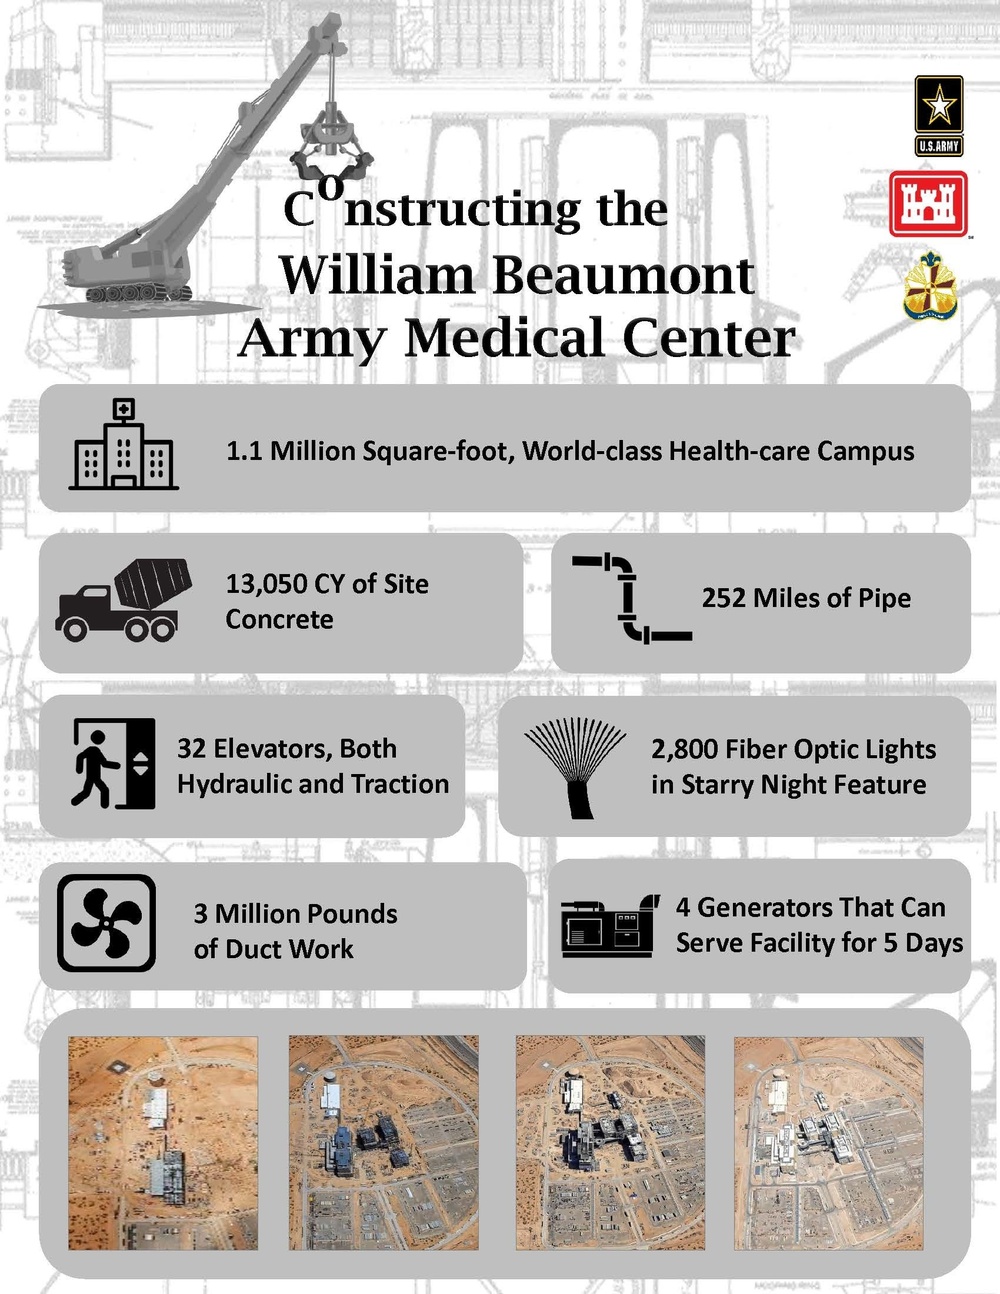 Construction nearing completion for the William Beaumont Army Medical Center in Fort Bliss, El Paso, Texas.